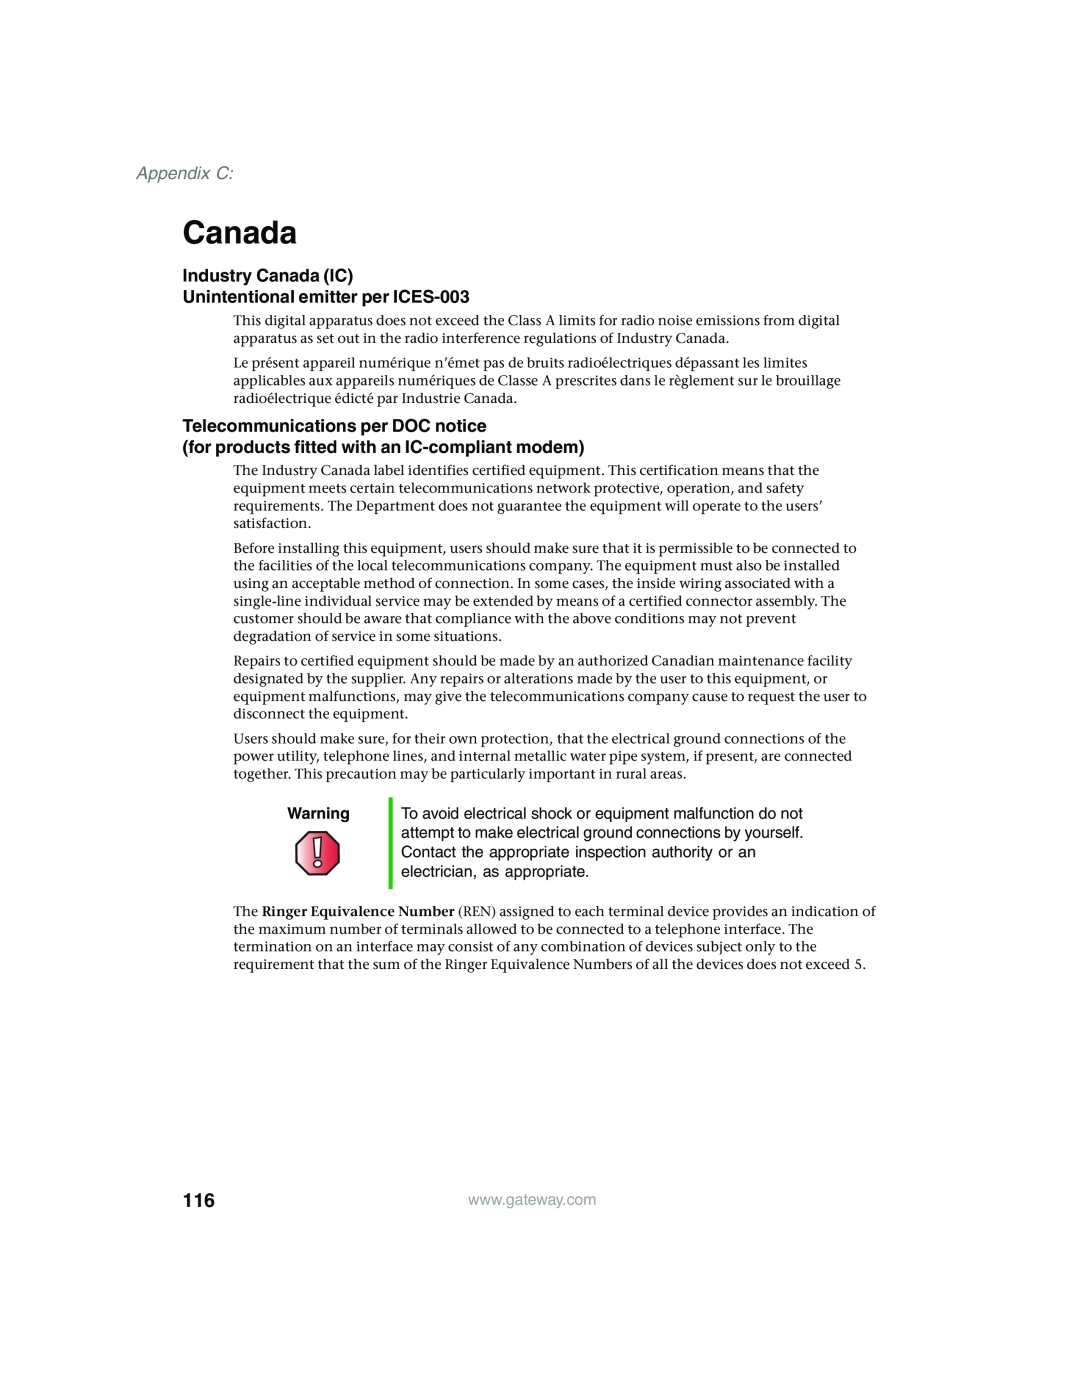 Gateway 980 manual Industry Canada IC Unintentional emitter per ICES-003, Telecommunications per DOC notice, Appendix C 